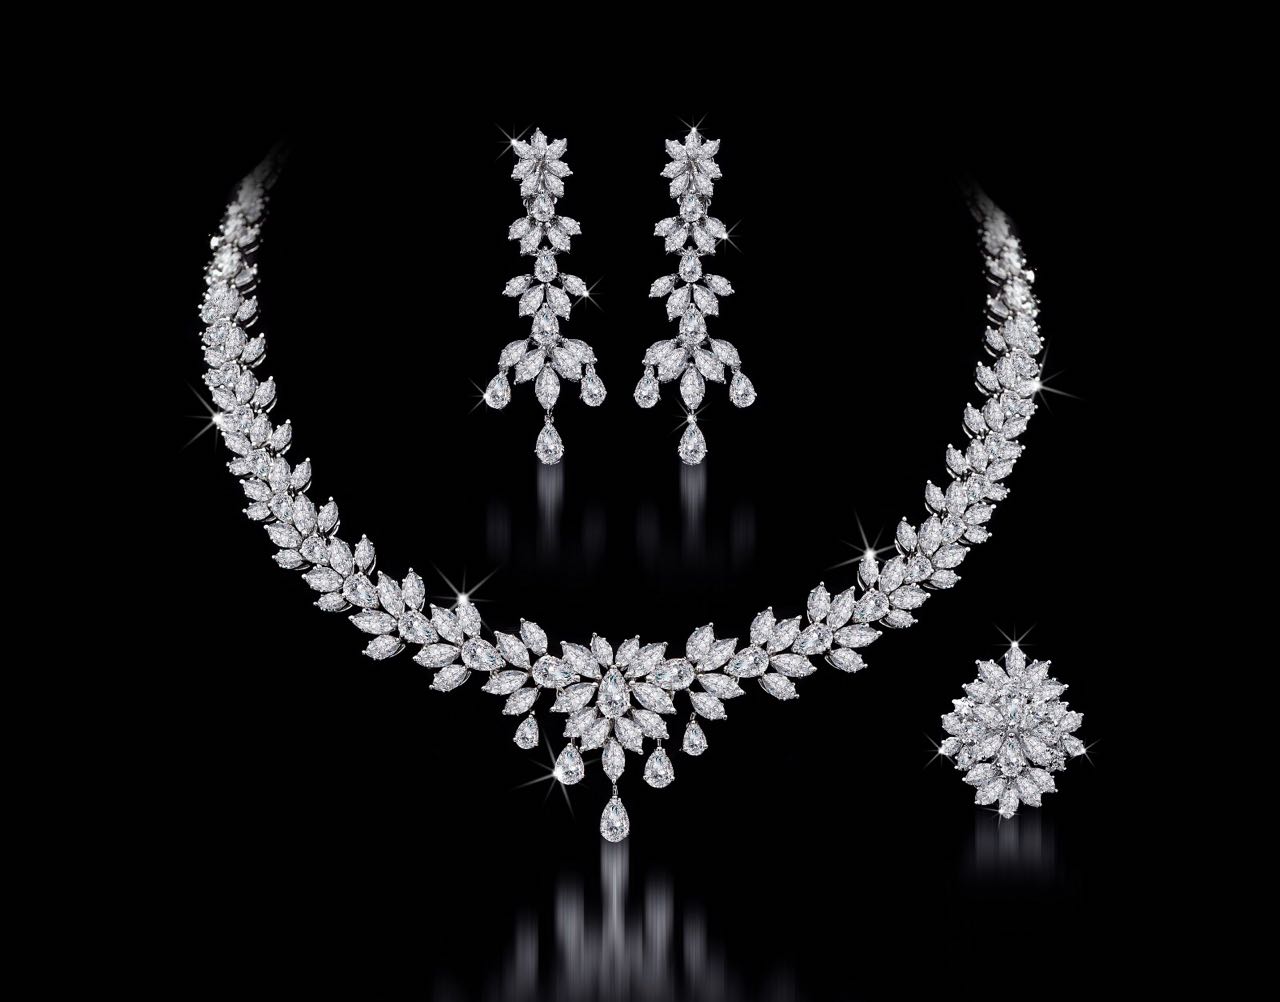 Diamond necklace, earrings and ring set